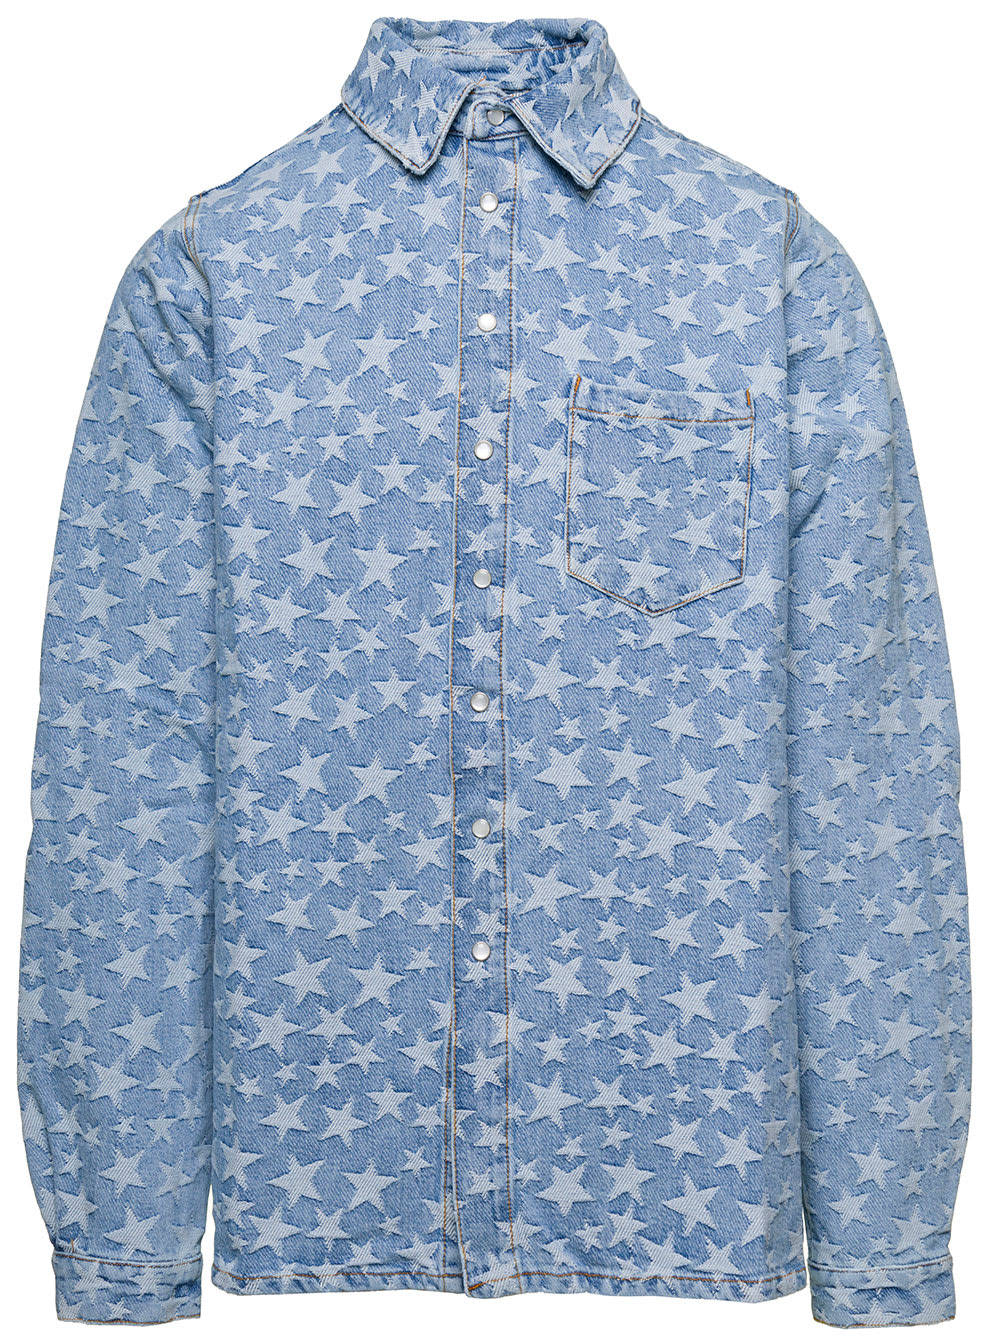 Light Blue Long Sleeve Shirt With All-over Star Print In Cotton Denim